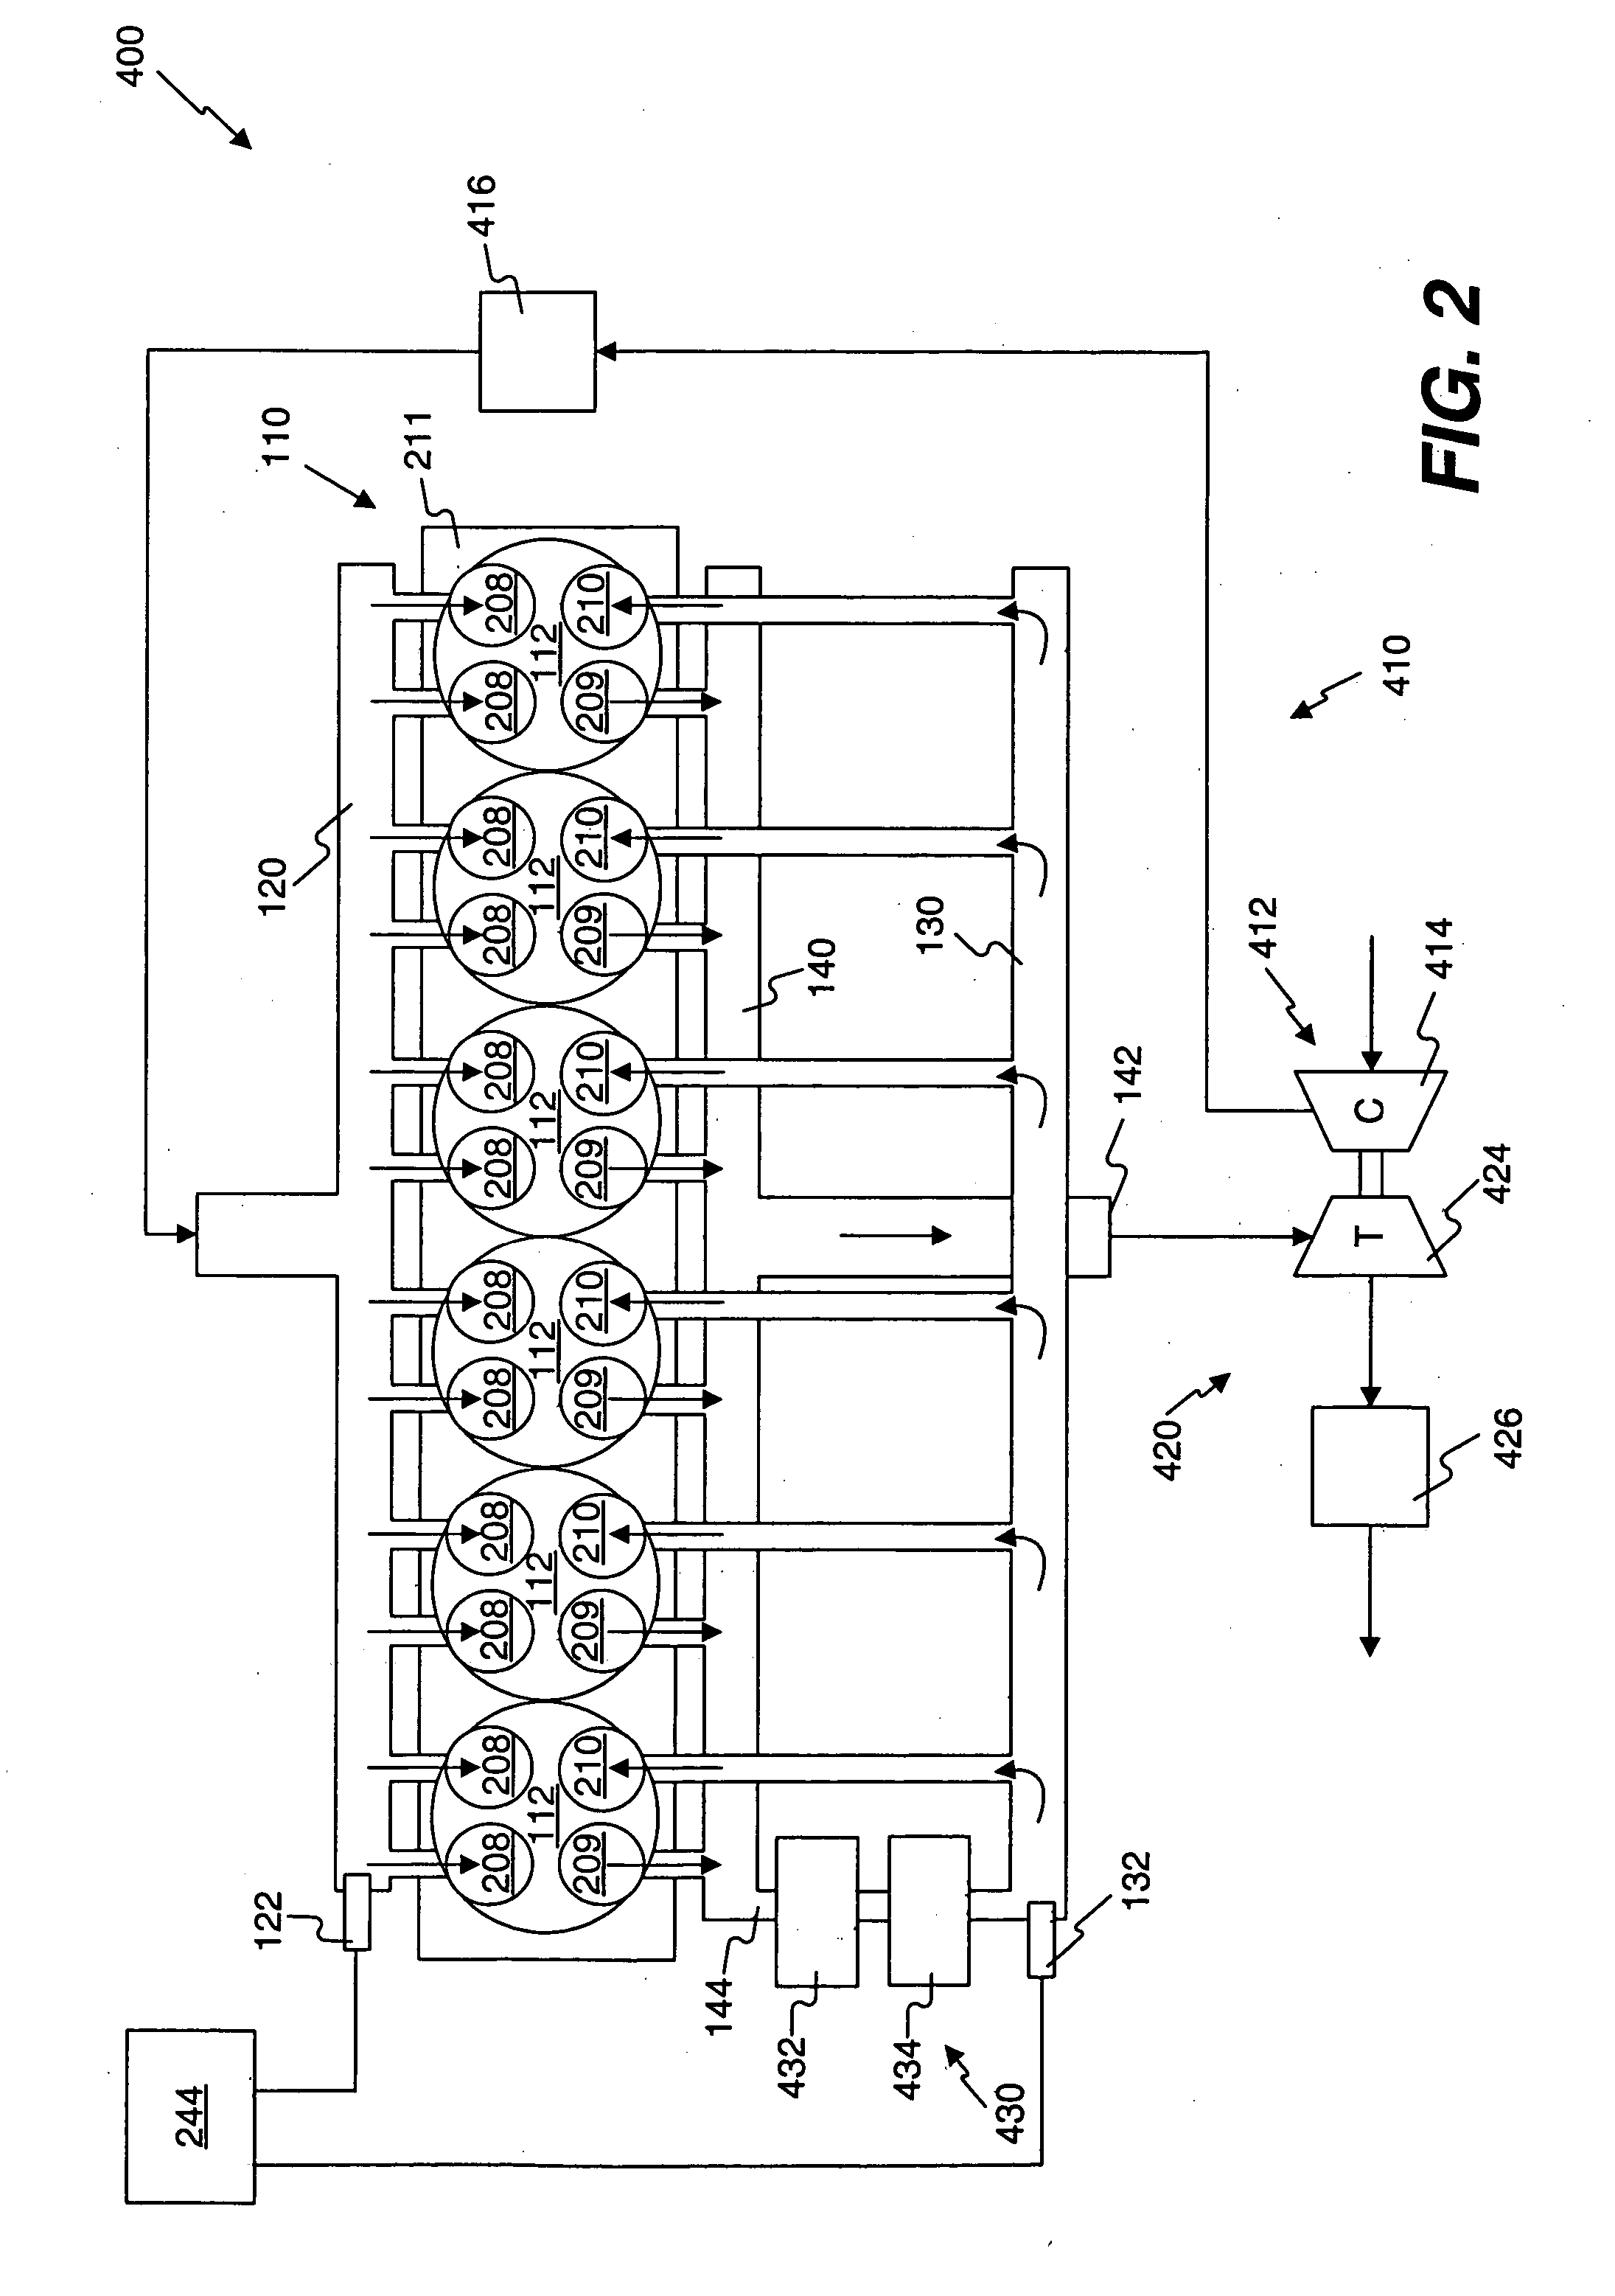 Exhaust gas recirculation system with in-cylinder valve actuation